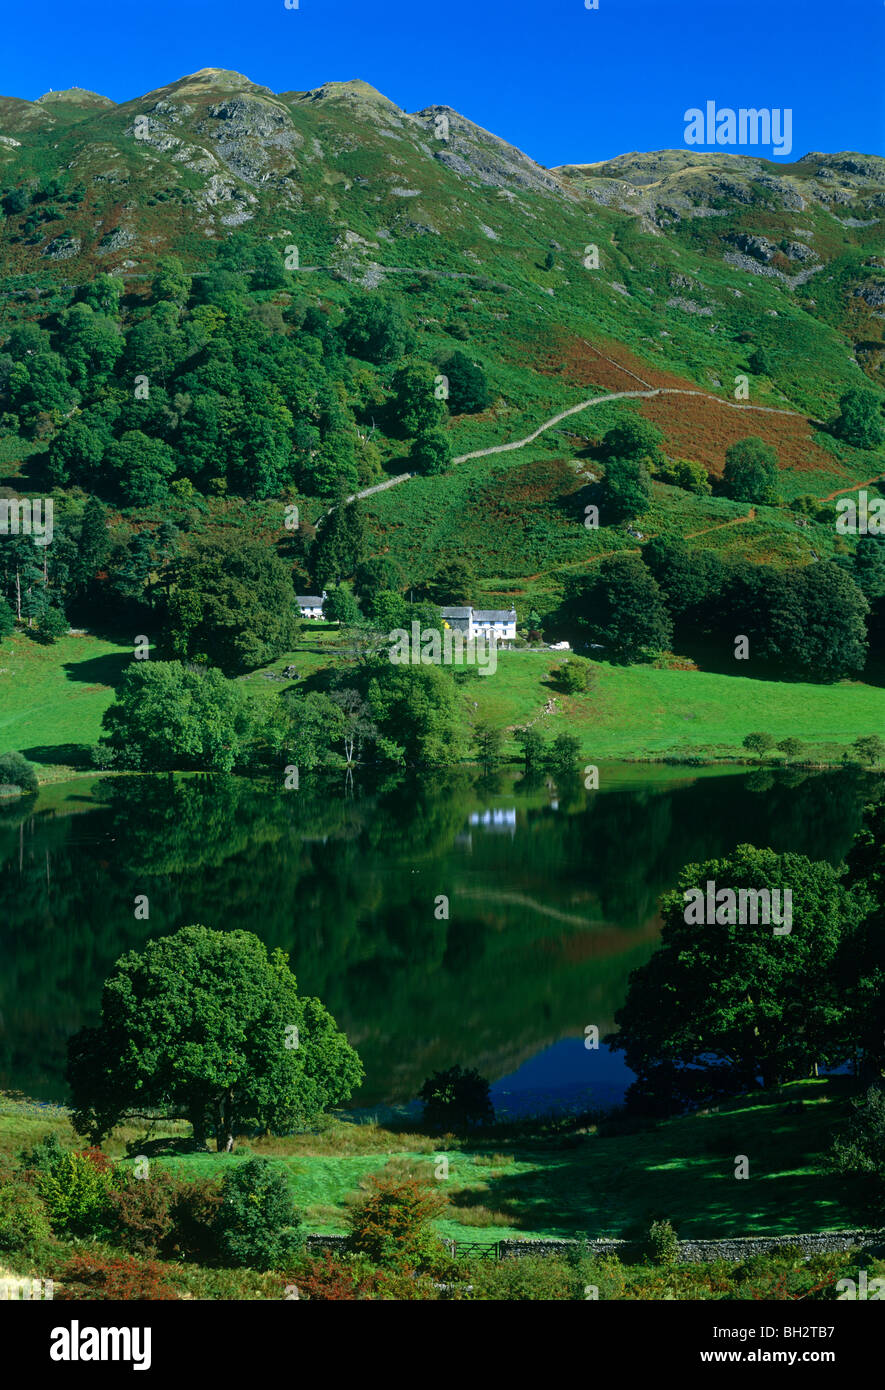 A view of Loughrigg Tarn and Loughrigg Fell near Ambleside in the Lake District National Park, Cumbria, England Stock Photo